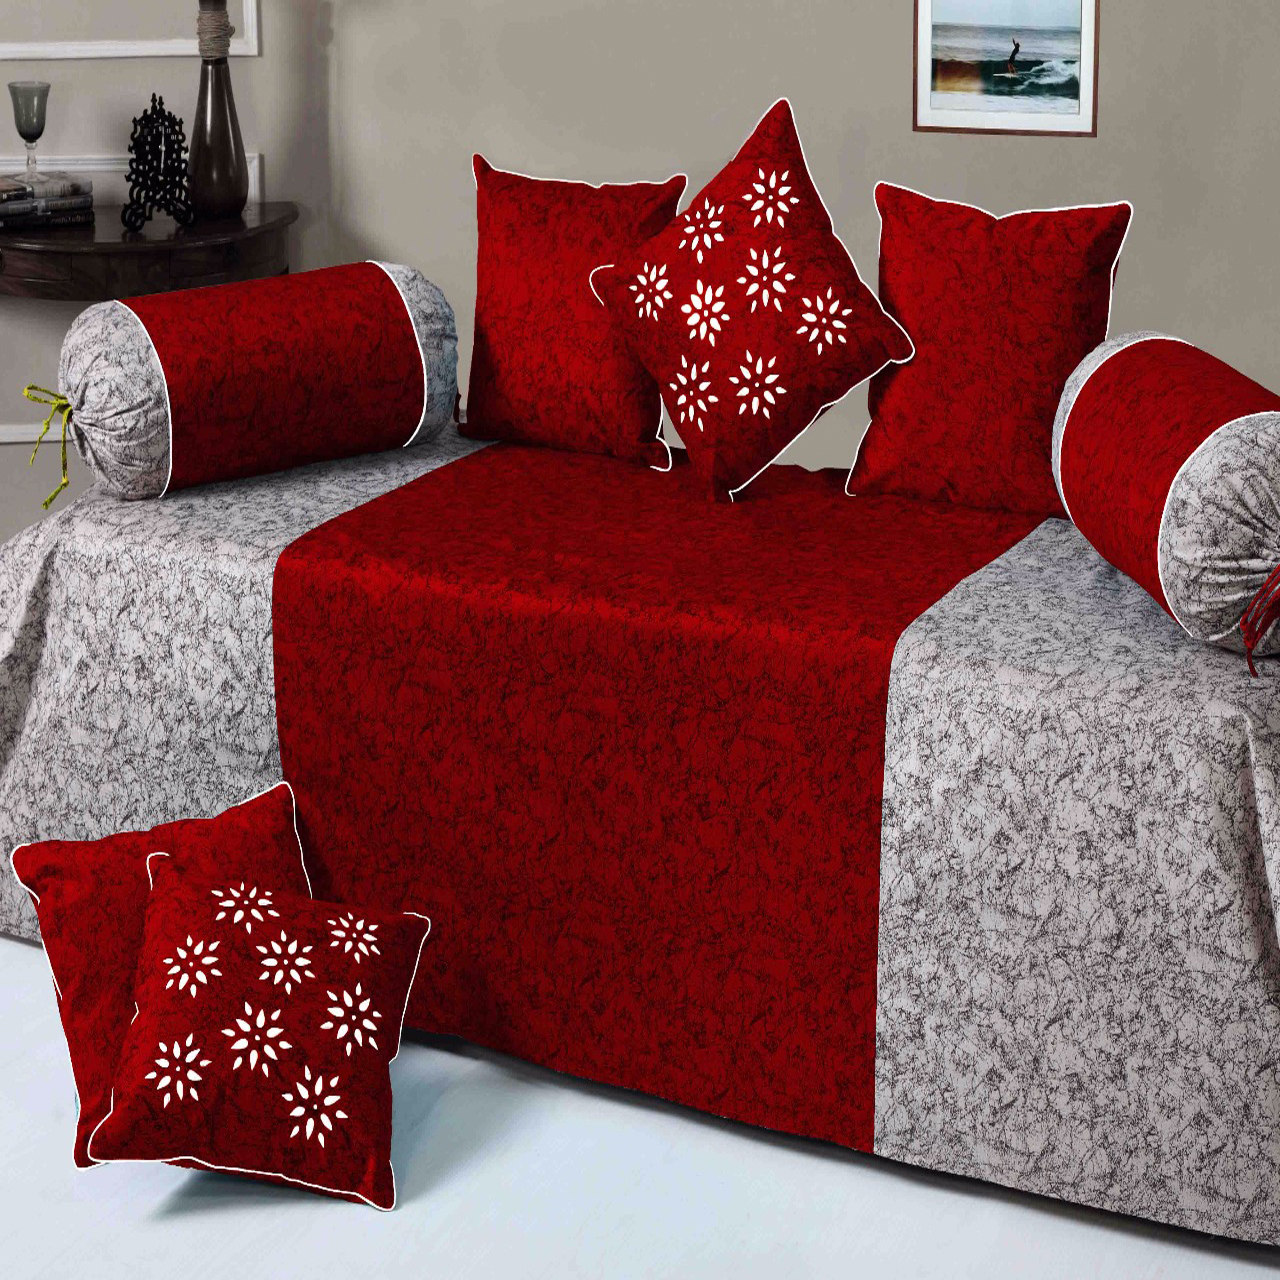 HandTex Home Red & Grey Color Designer Velvet Diwan set 1 Single Bedsheet With 5 Cushion Covers and 2 Blosters Covers